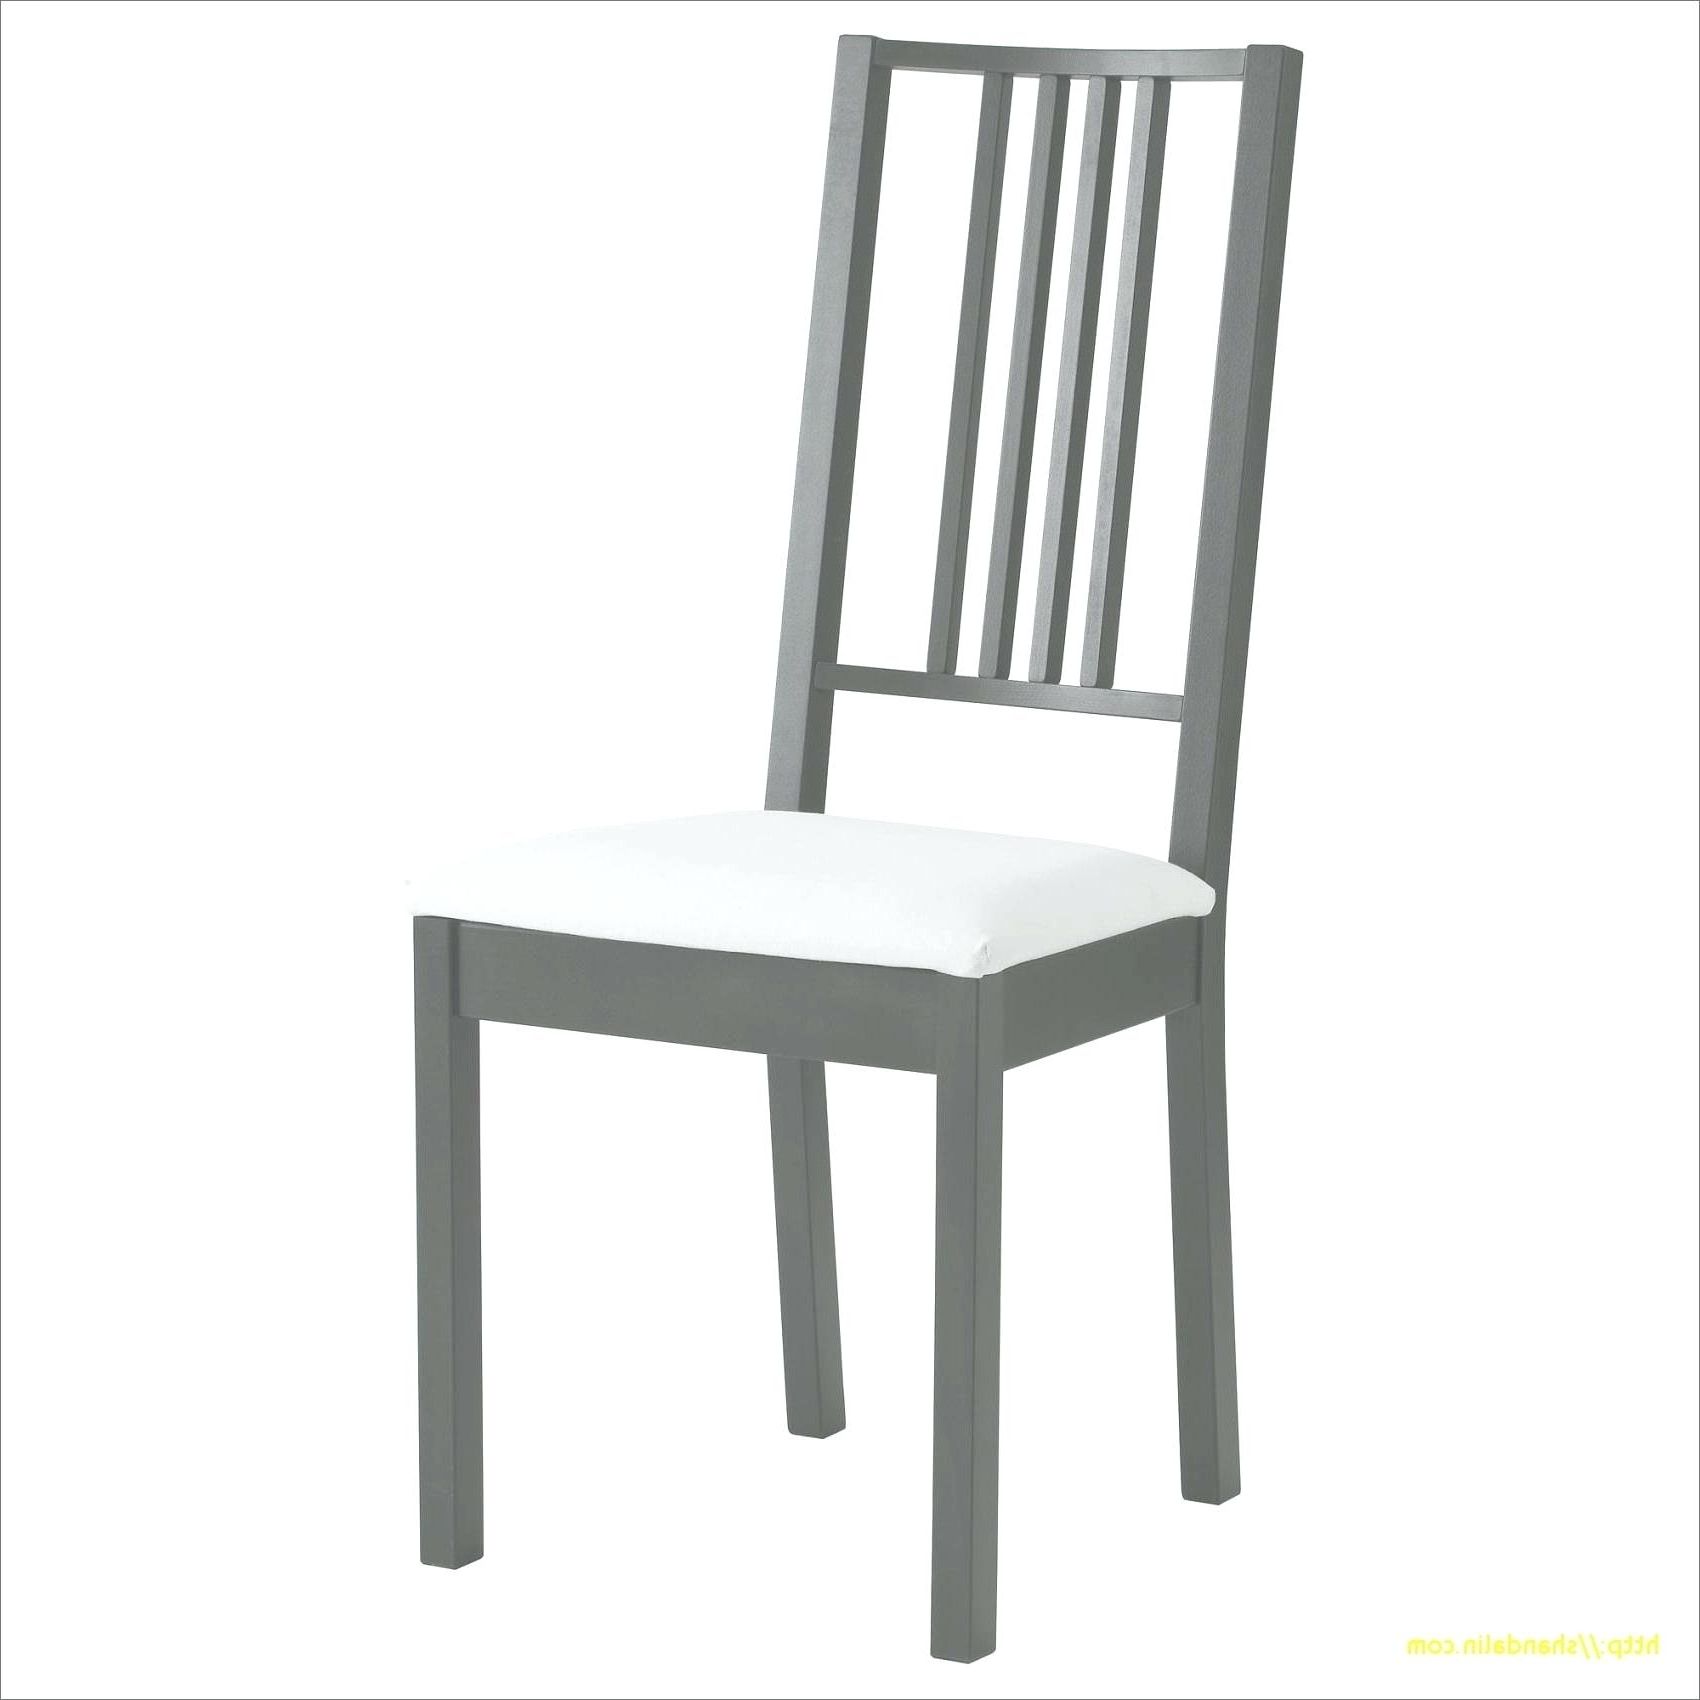 2018 Chaise Cuisine Ikea De Unique Chaises Salle Eur Manger For Coin Pertaining To Ikea Chaises (View 8 of 15)